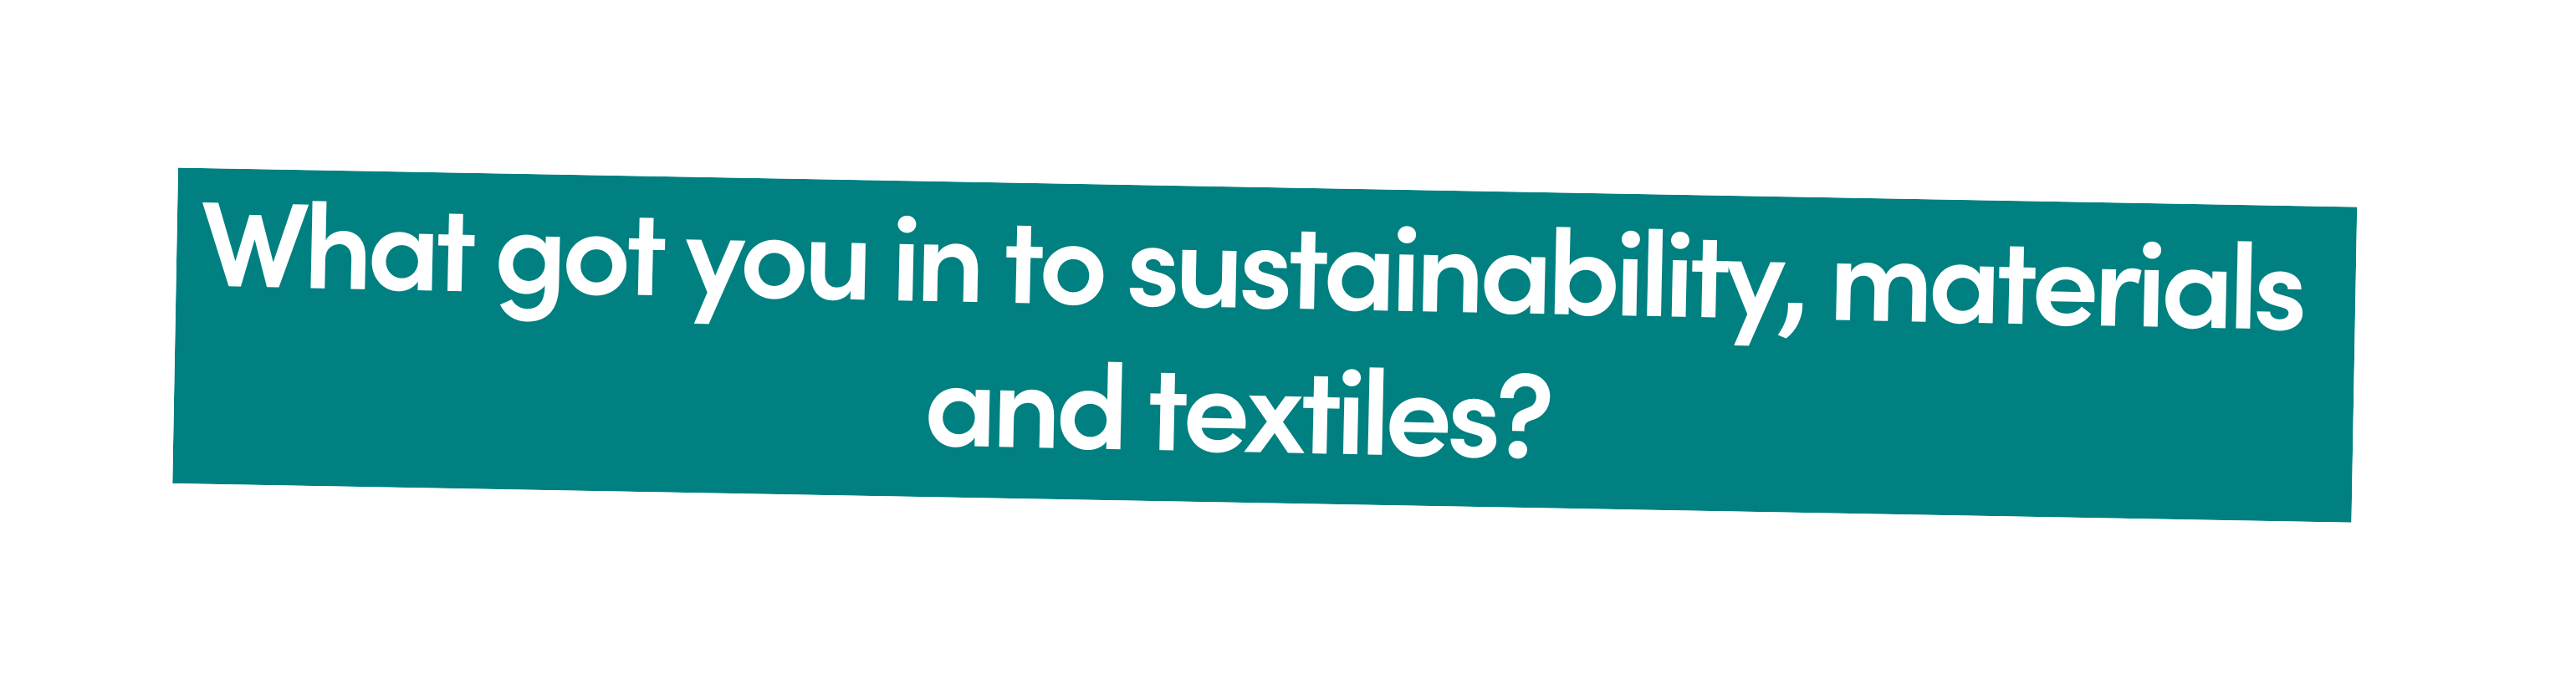 What got you in to sustainability, materials and textiles? 